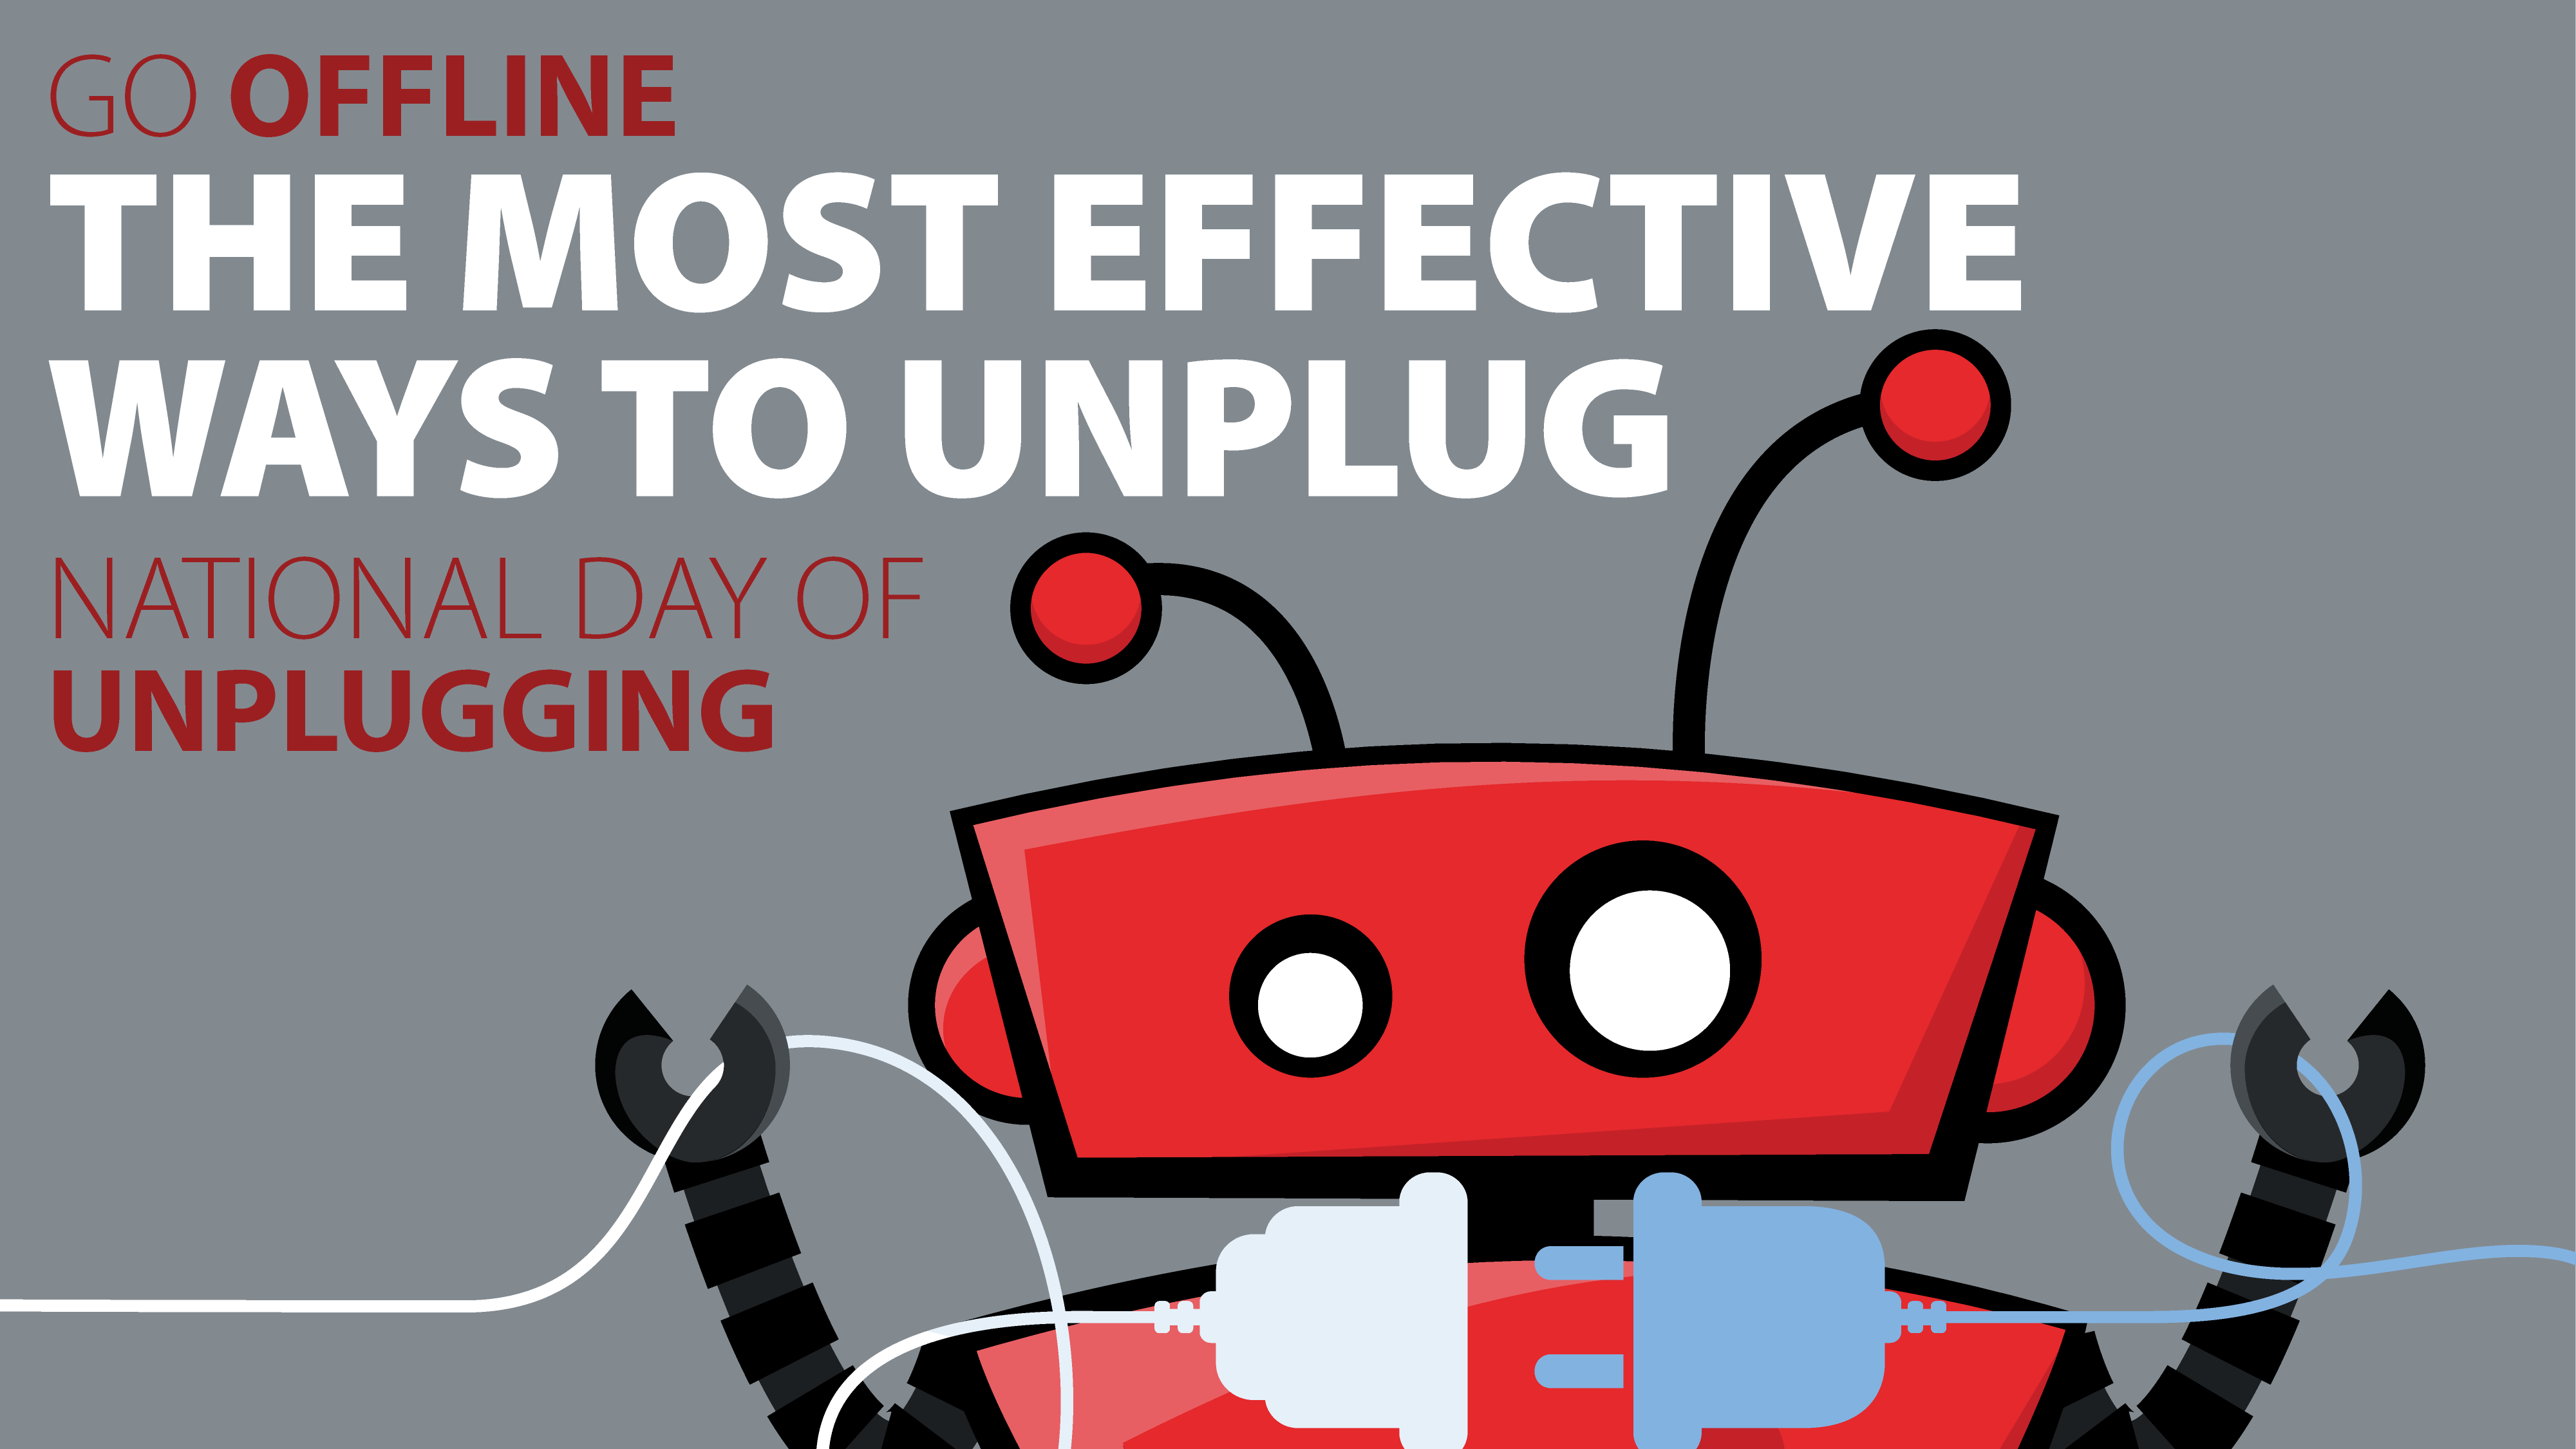 The Most Effective Ways to Unplug on National Day of Unpulgging